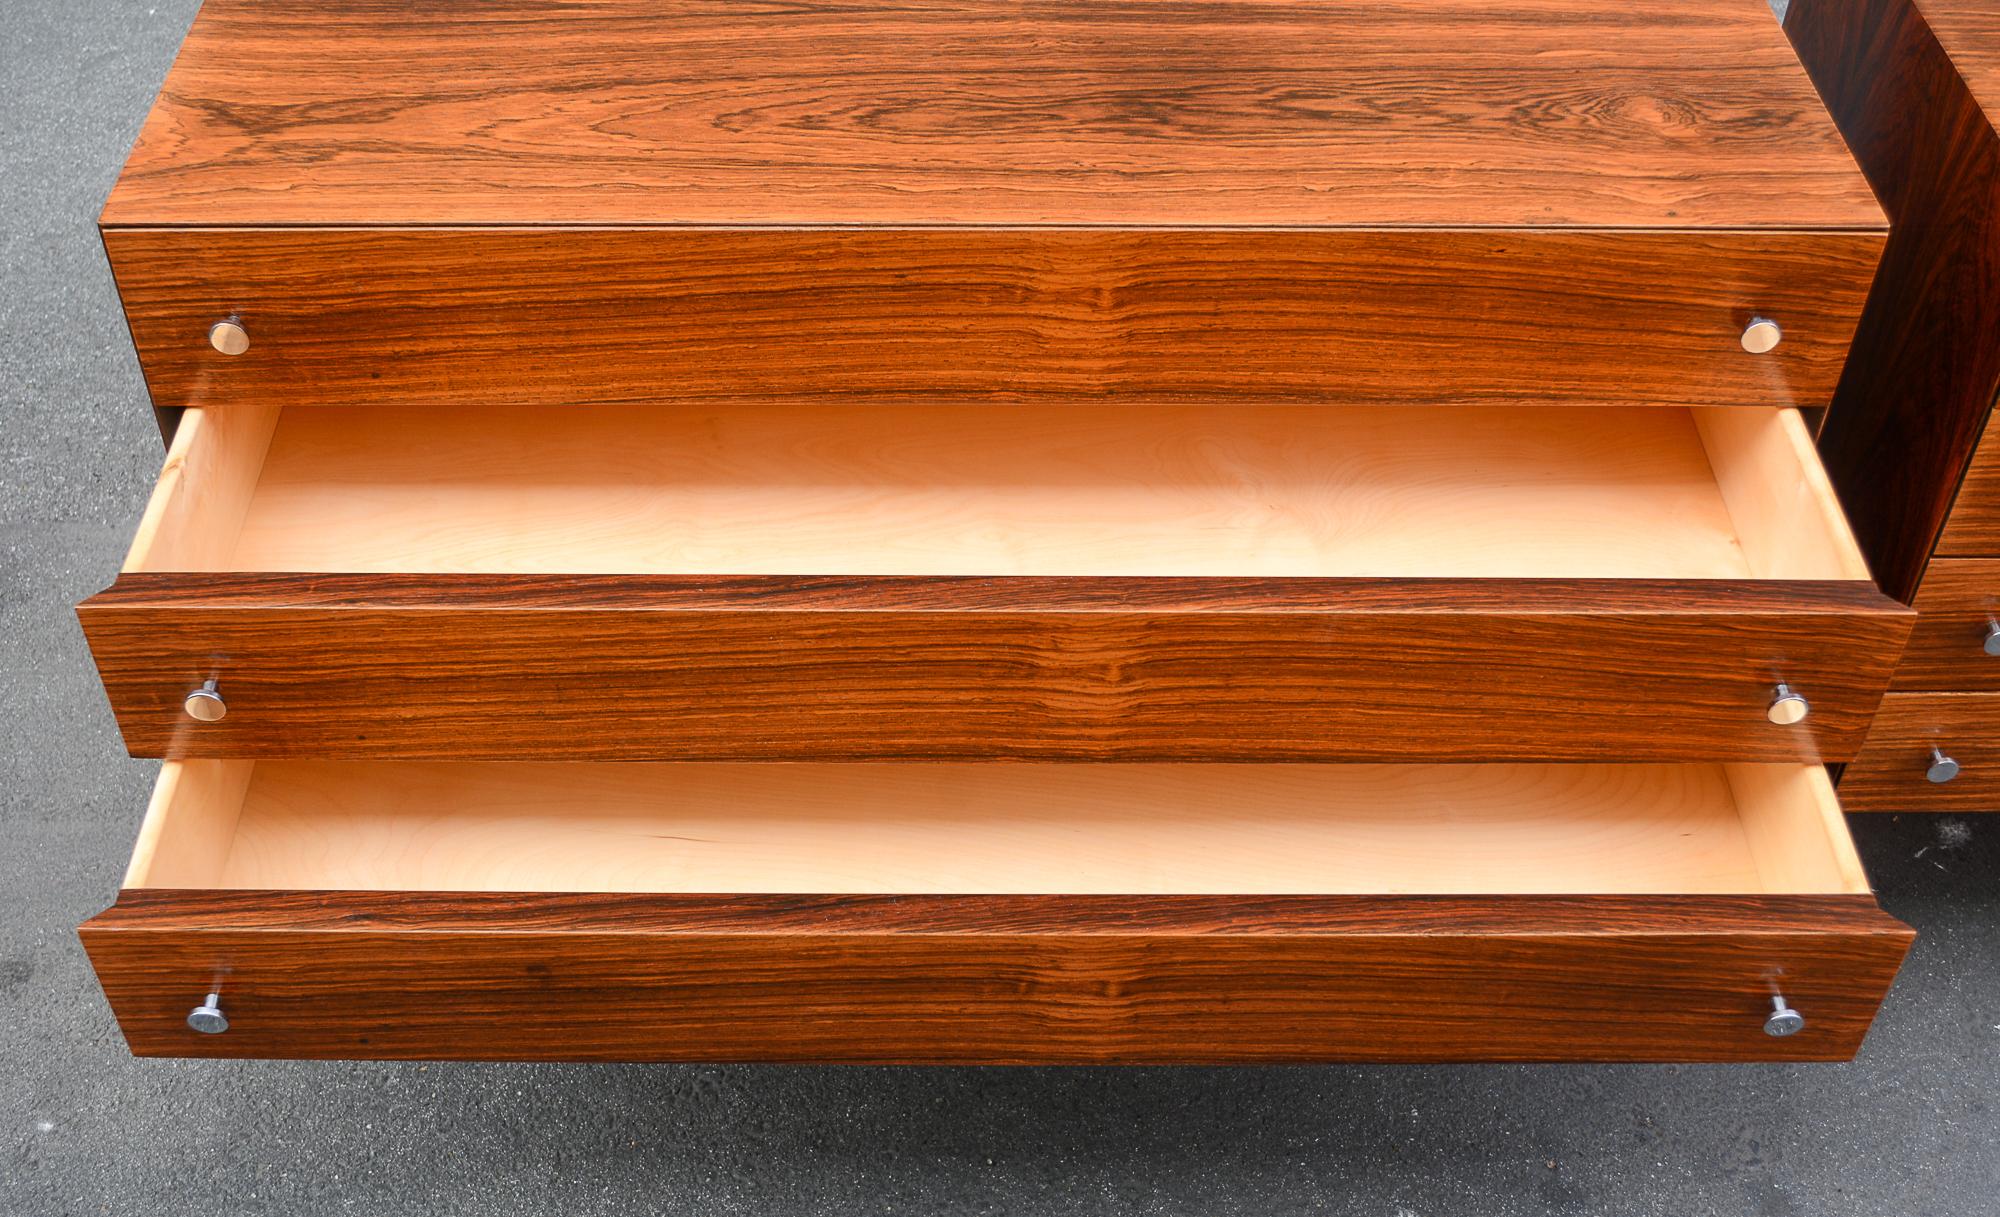 Pair of Rosewood Chests by Poul Norreklit for Sigurd Hansen im Angebot 2